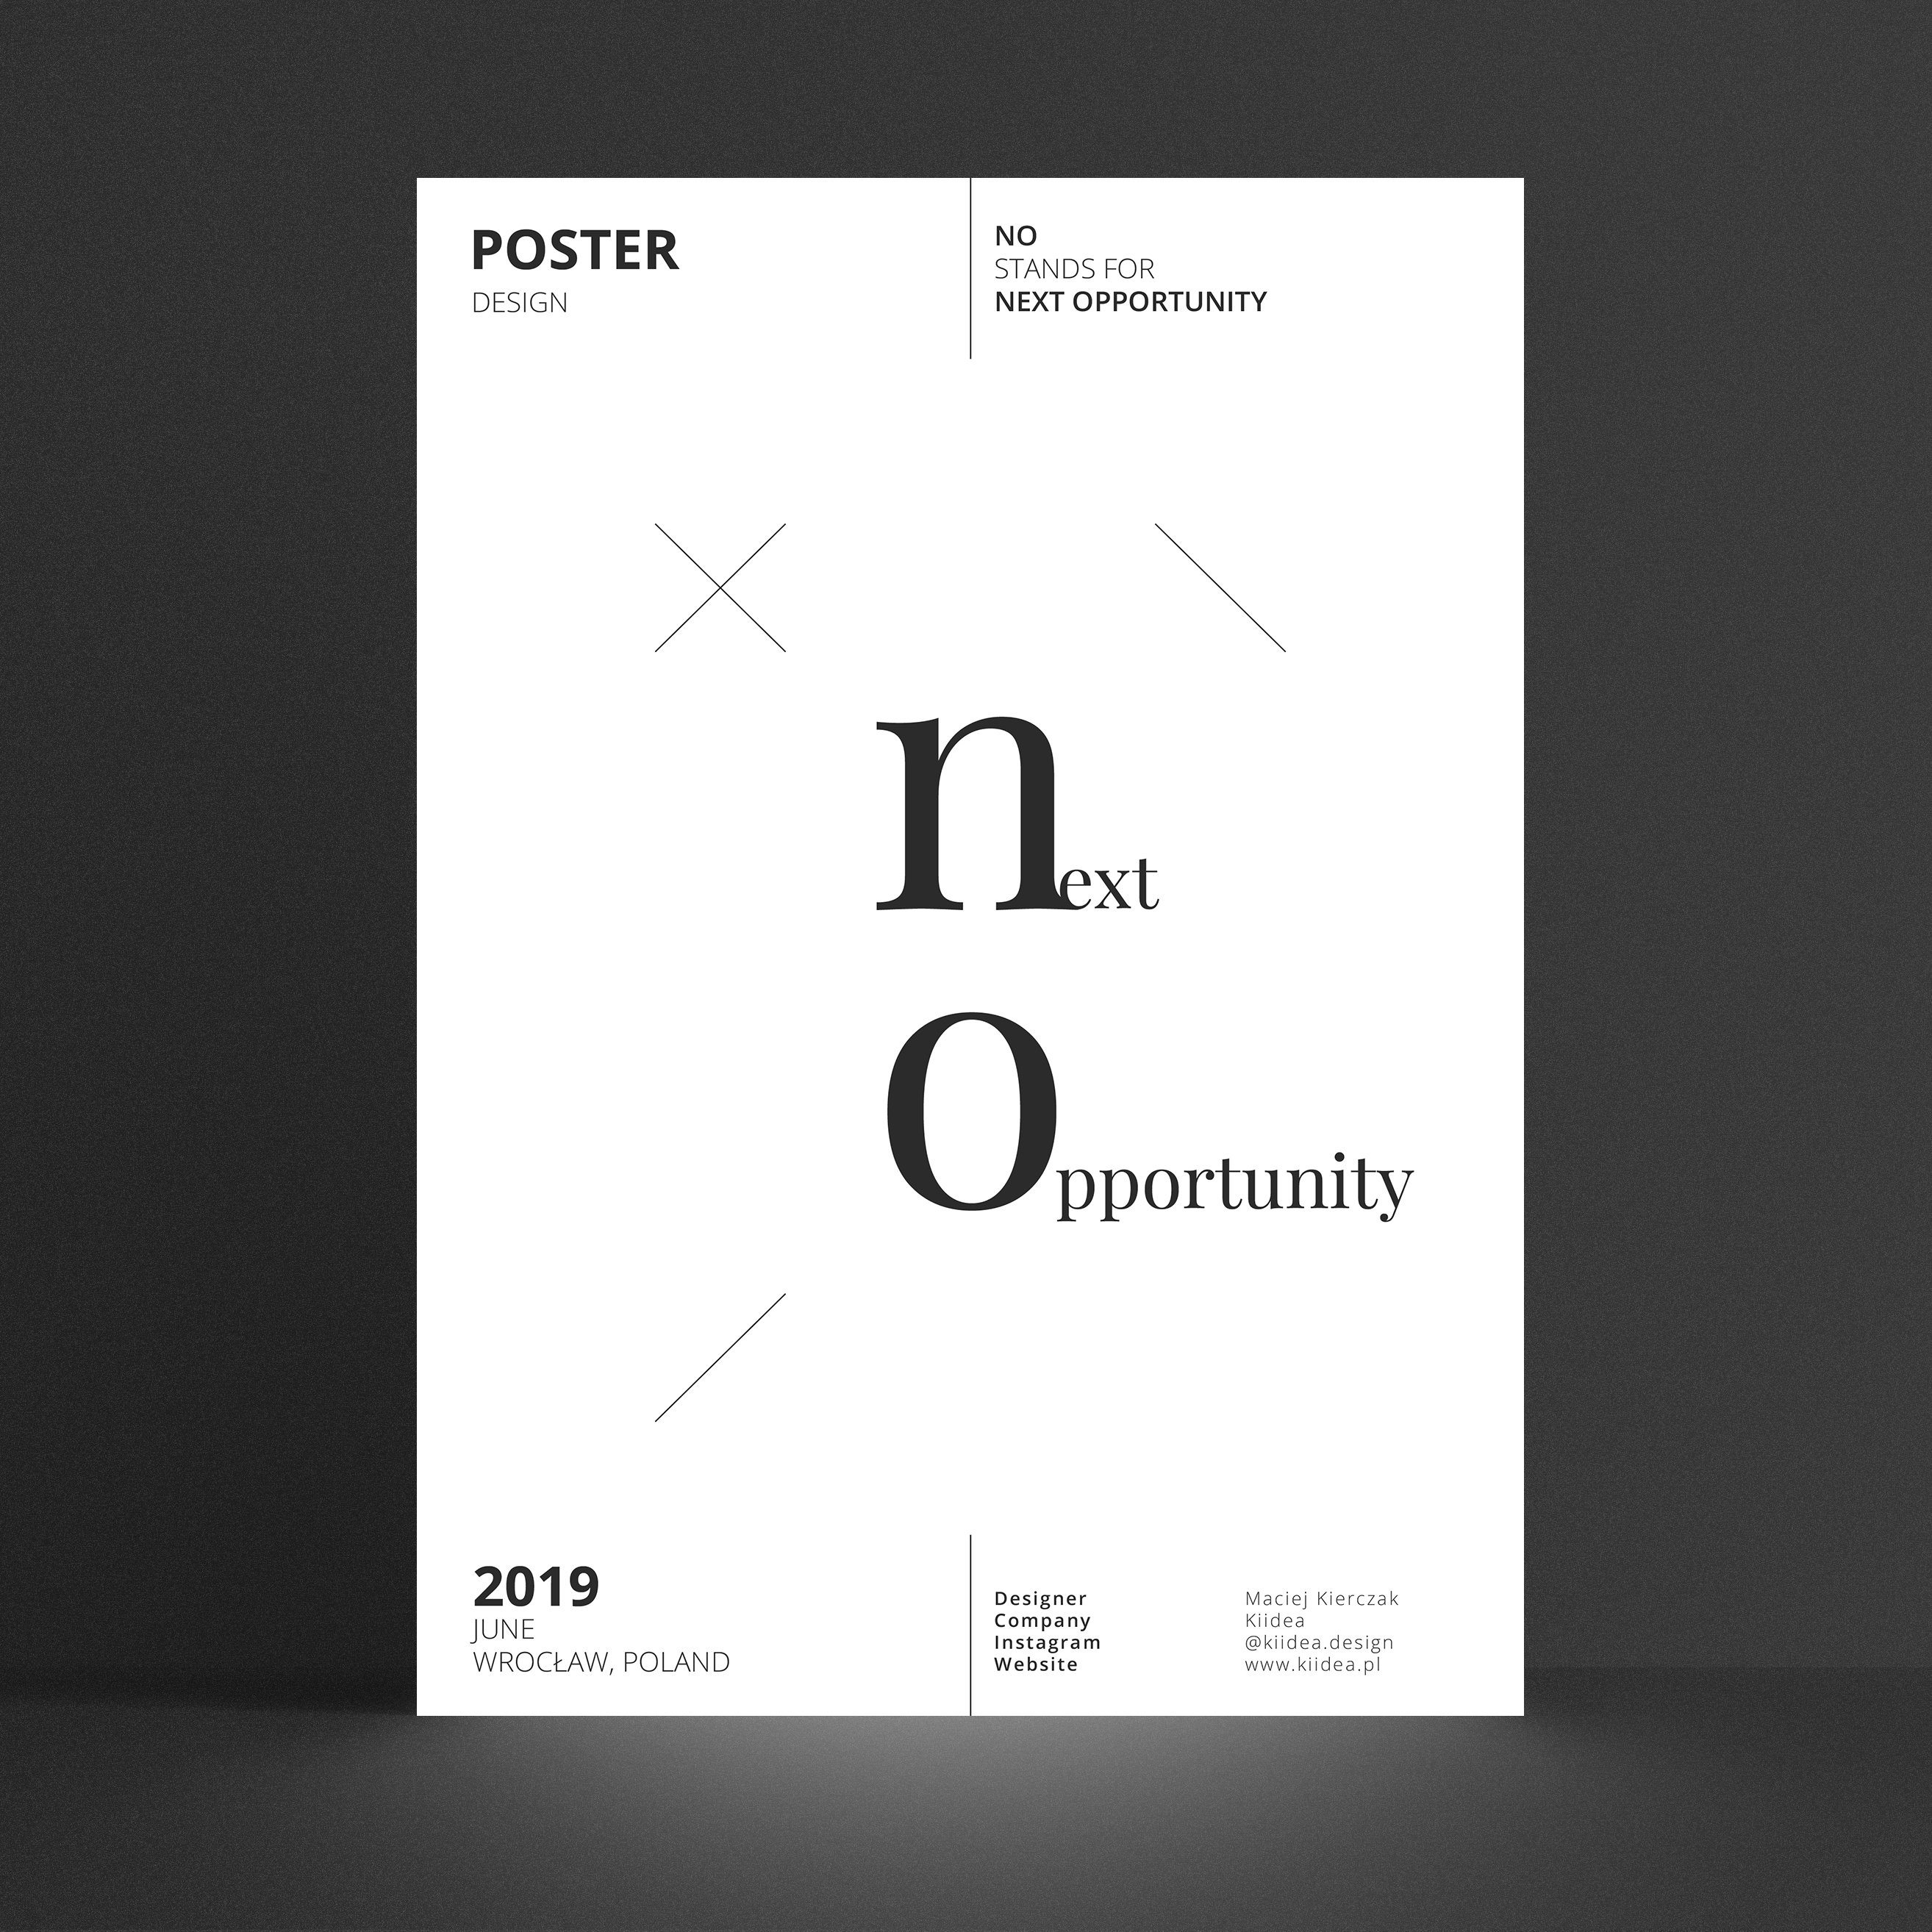 NO – next opportunity